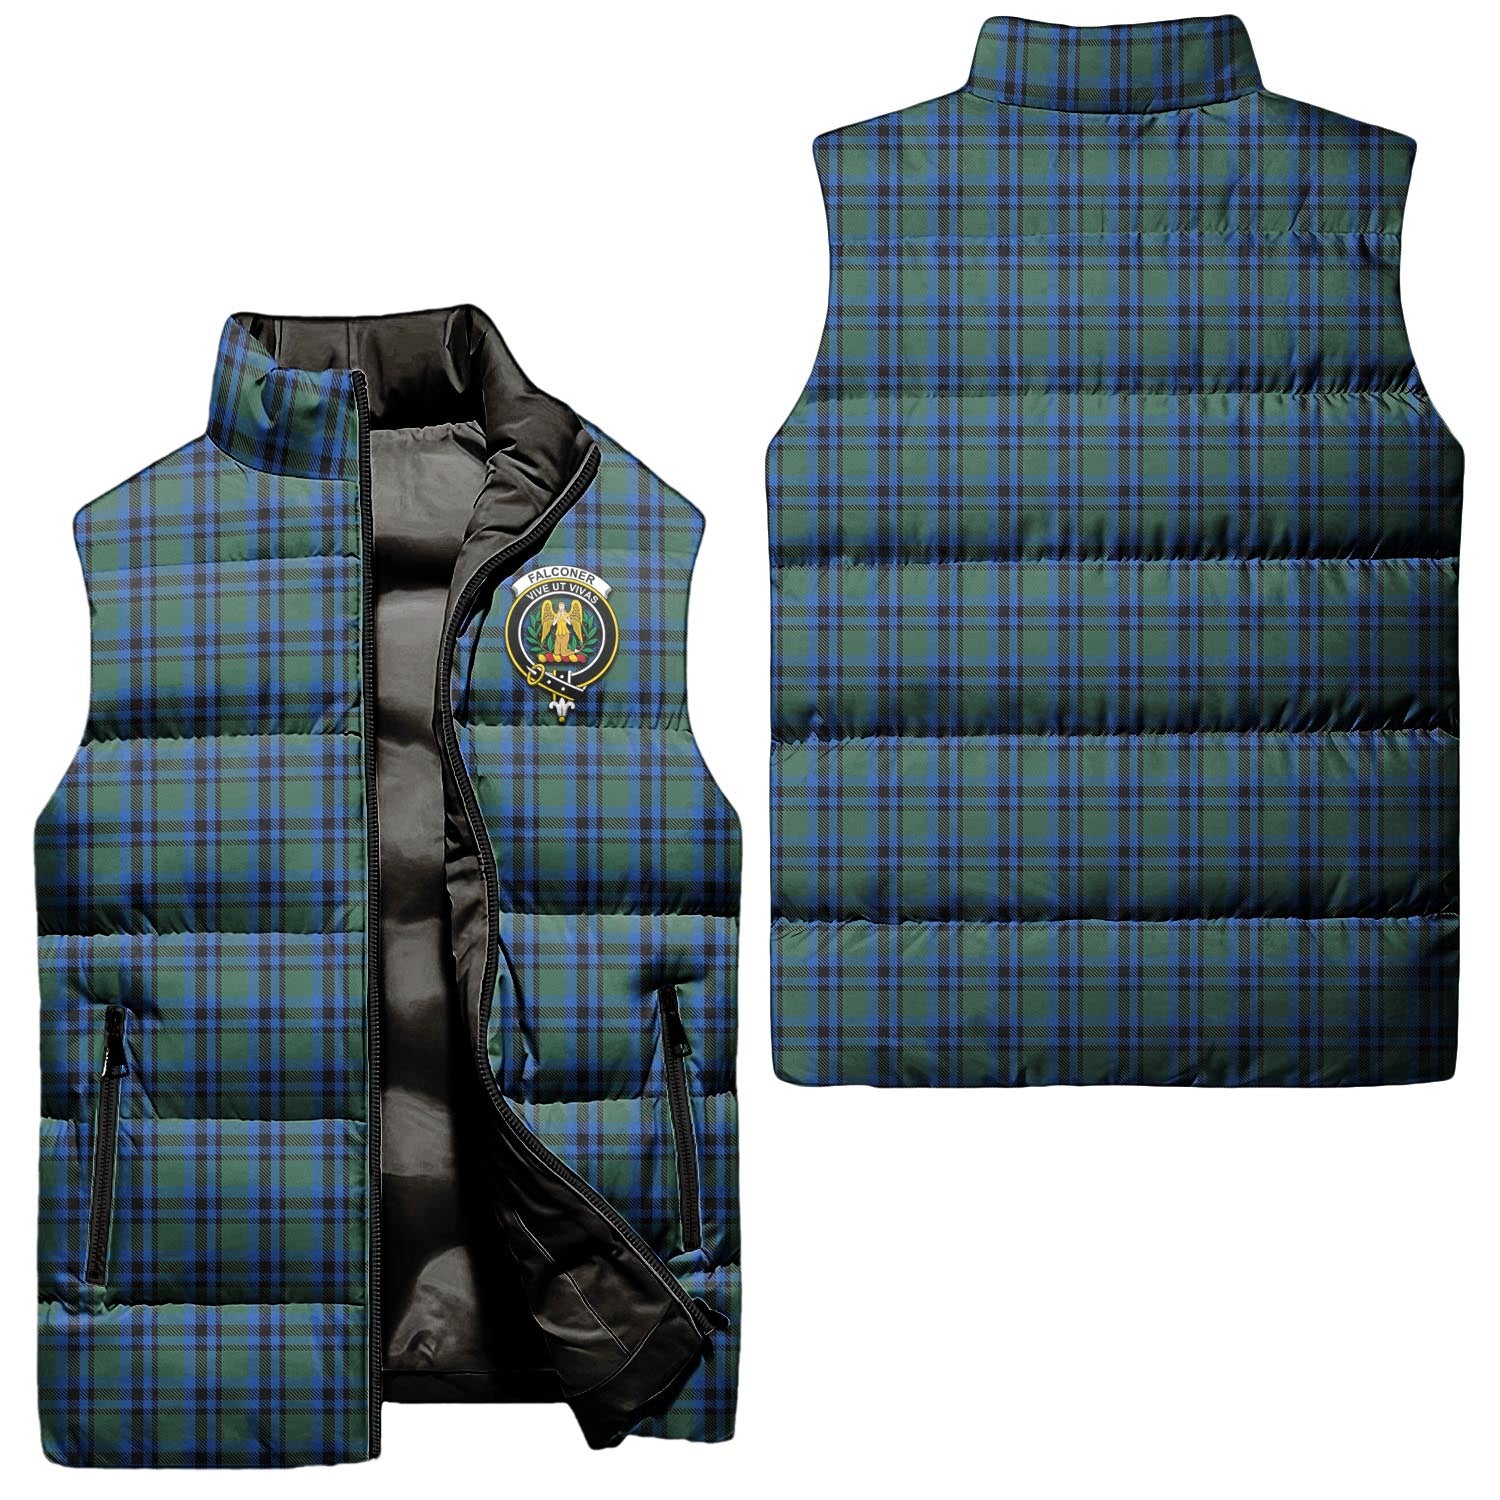 falconer-clan-puffer-vest-family-crest-plaid-sleeveless-down-jacket